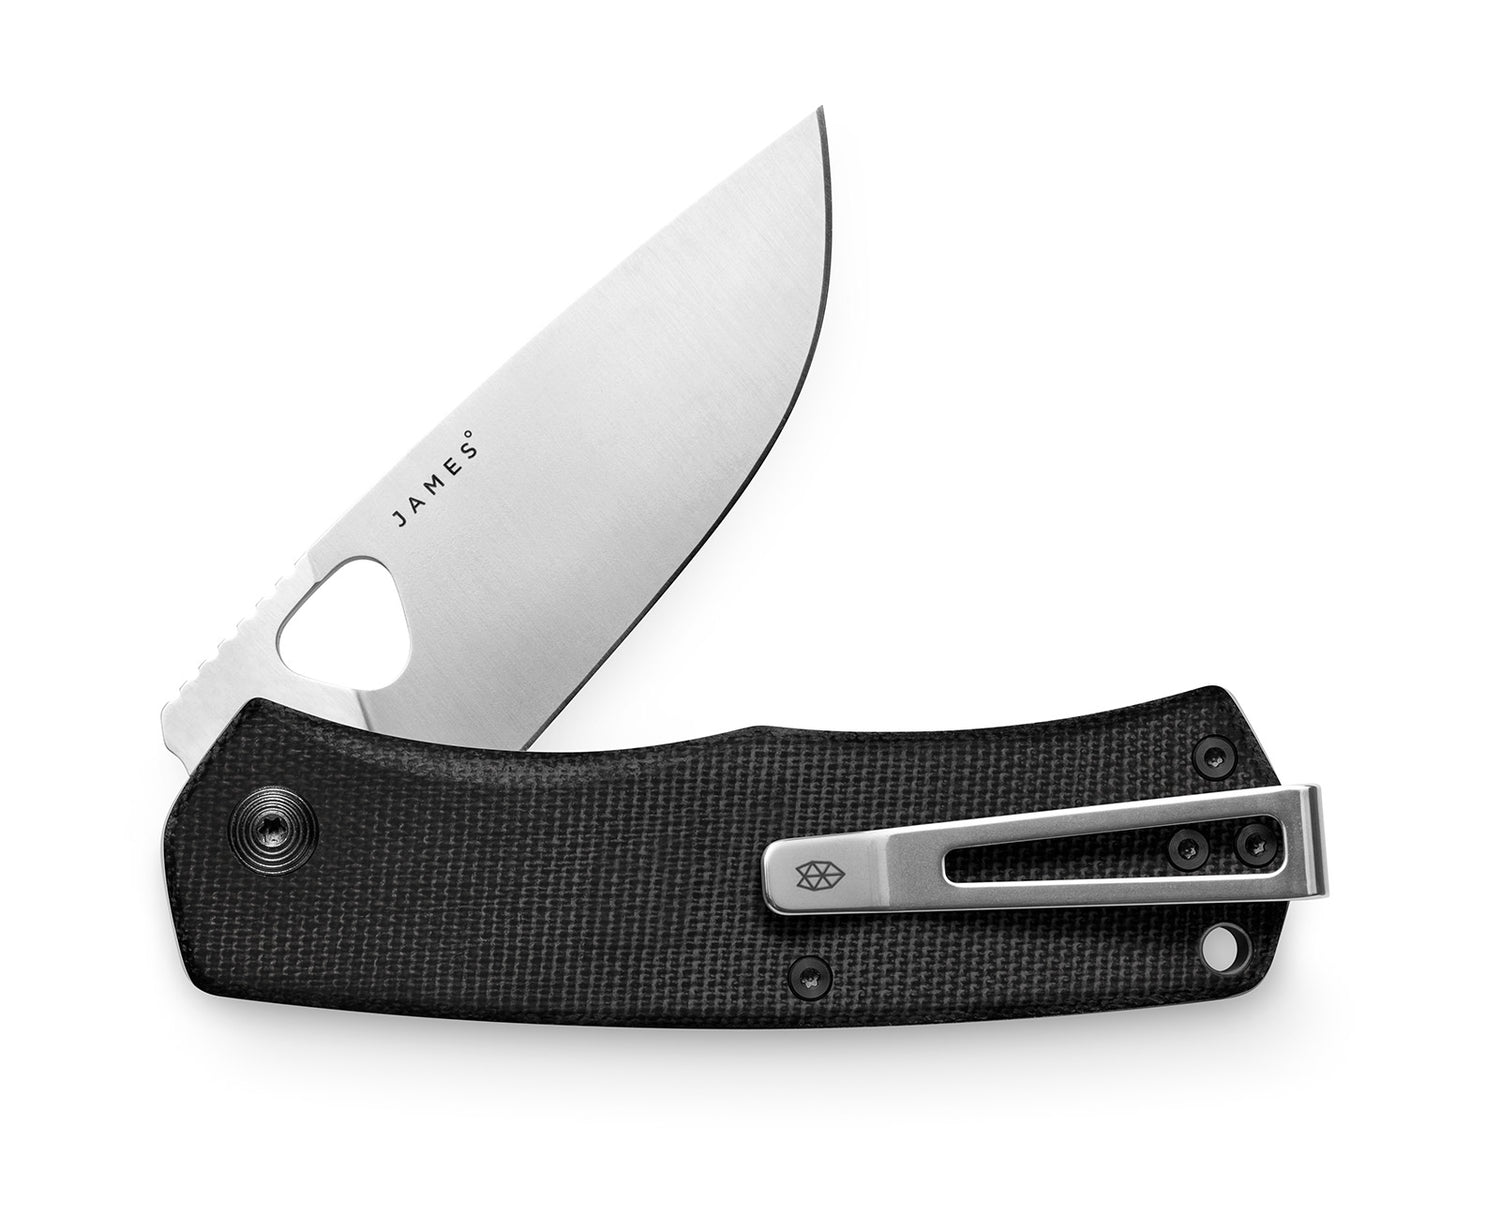 The Folsom knife with black micarta handle and stainless steel blade.